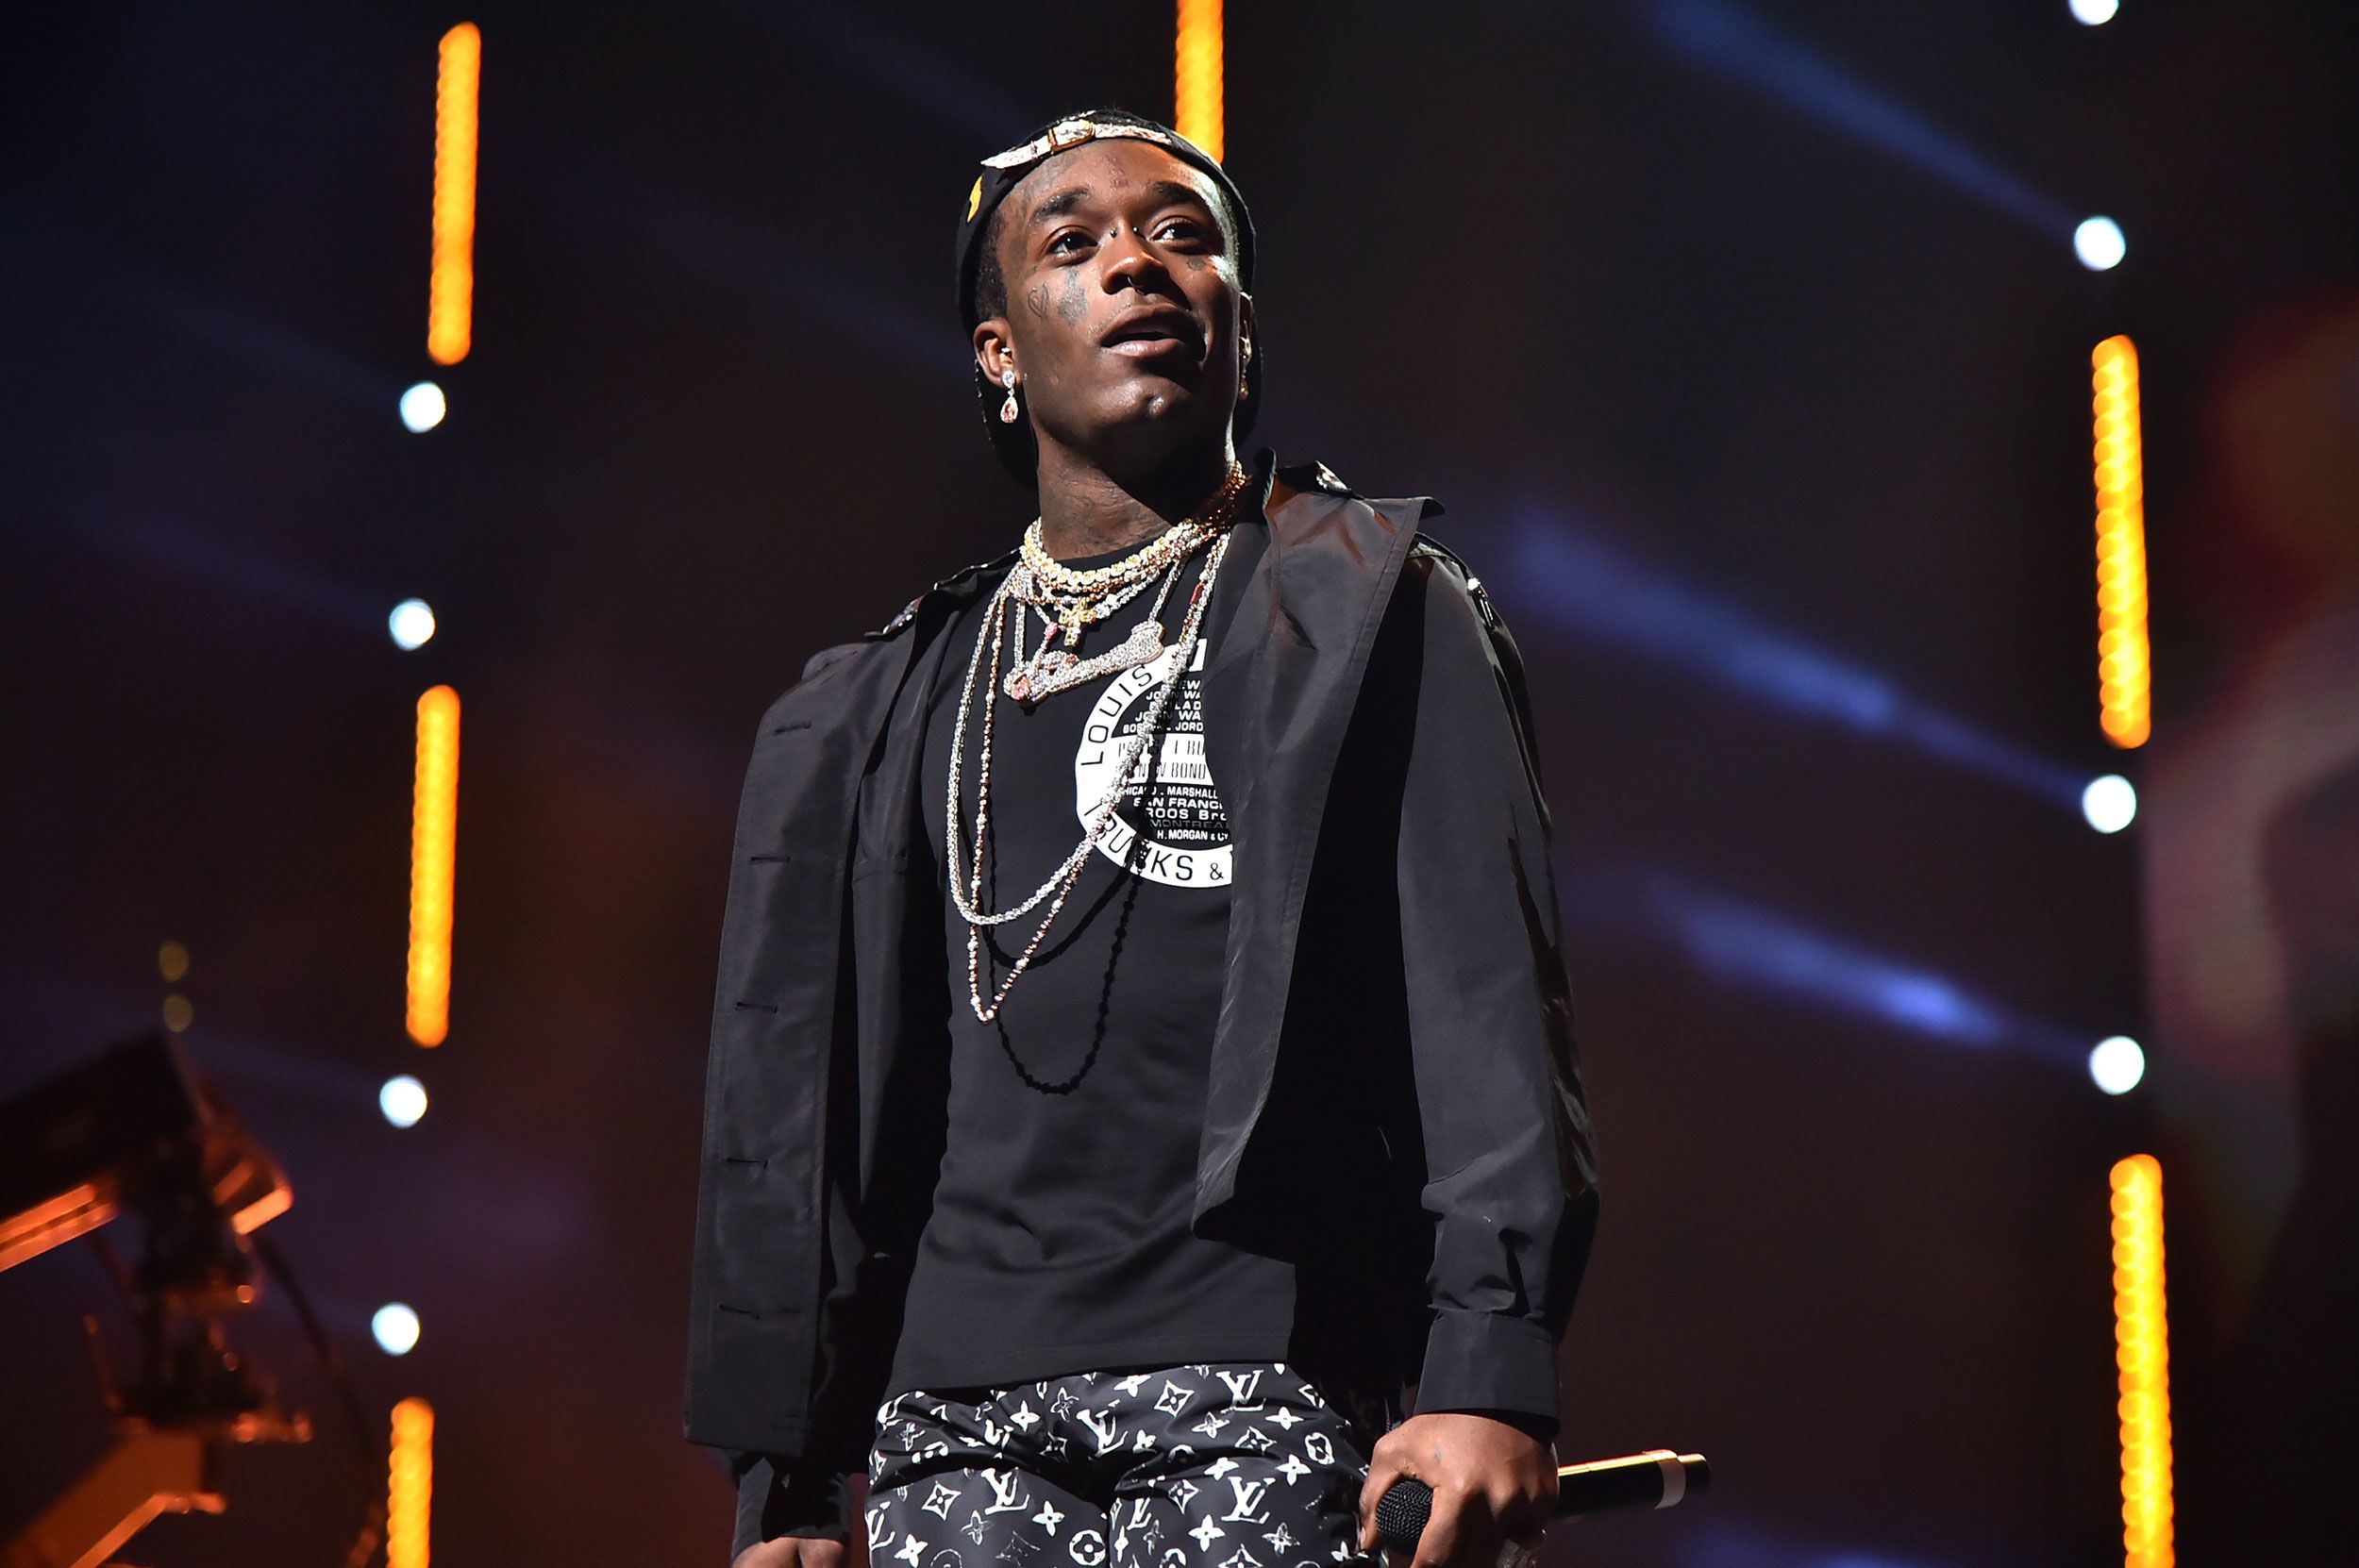 Lil Uzi Vert Announces Retirement From Music Industry After ‘LUV Is Rage 3’ And Nicki Minaj Collaboration